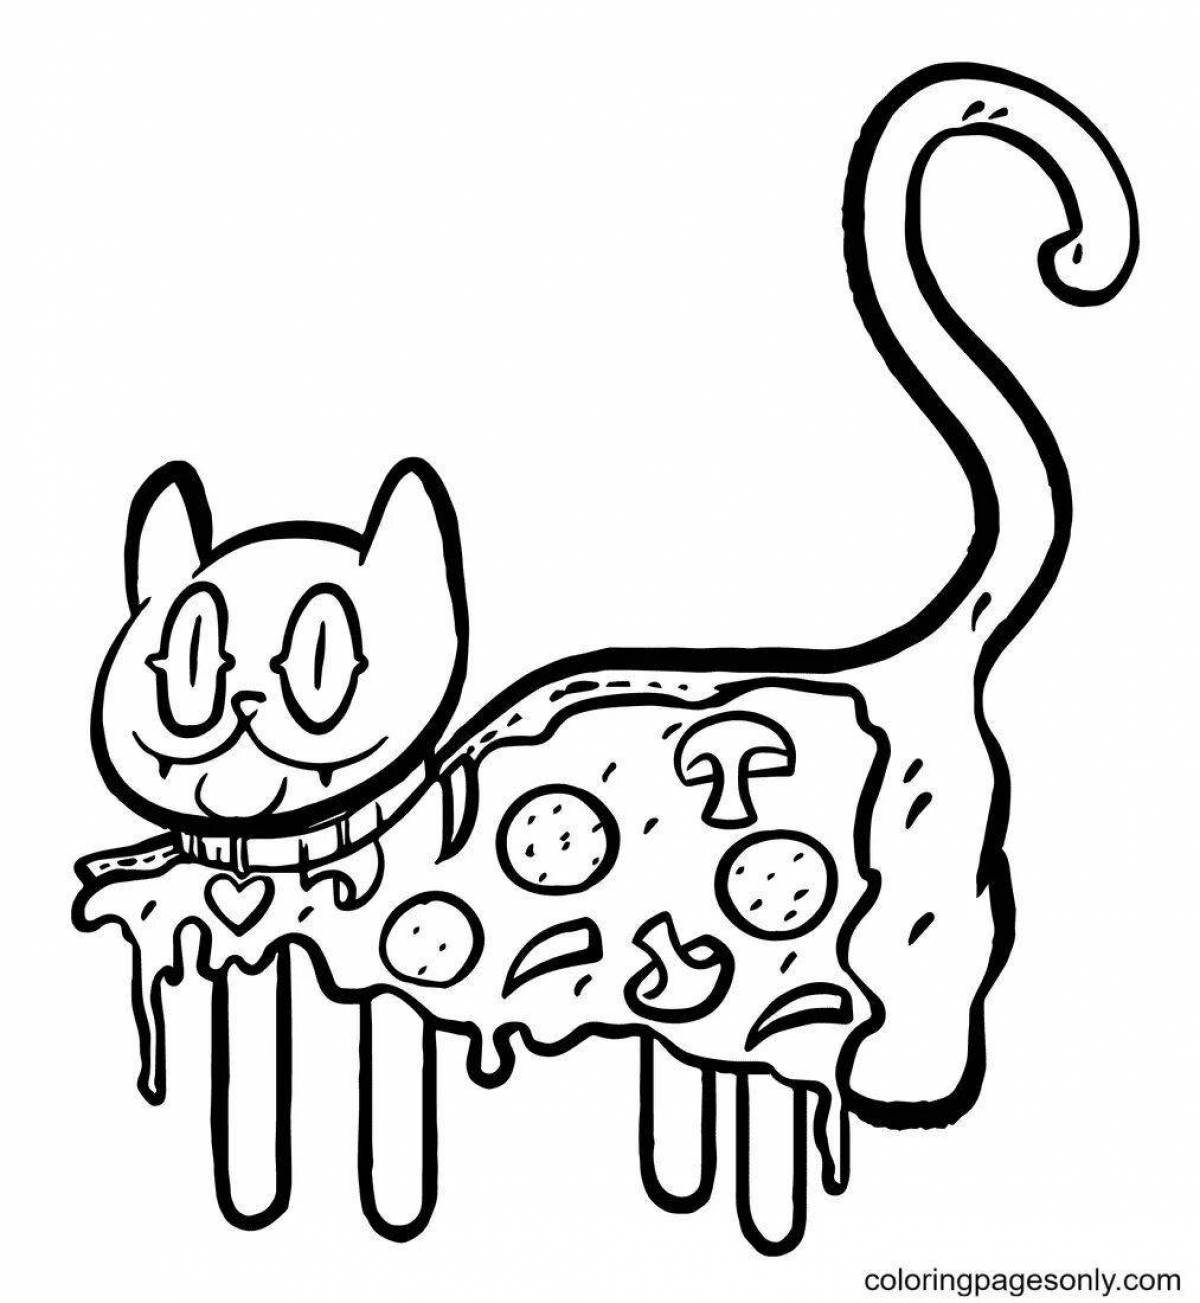 Animated pop cat coloring page